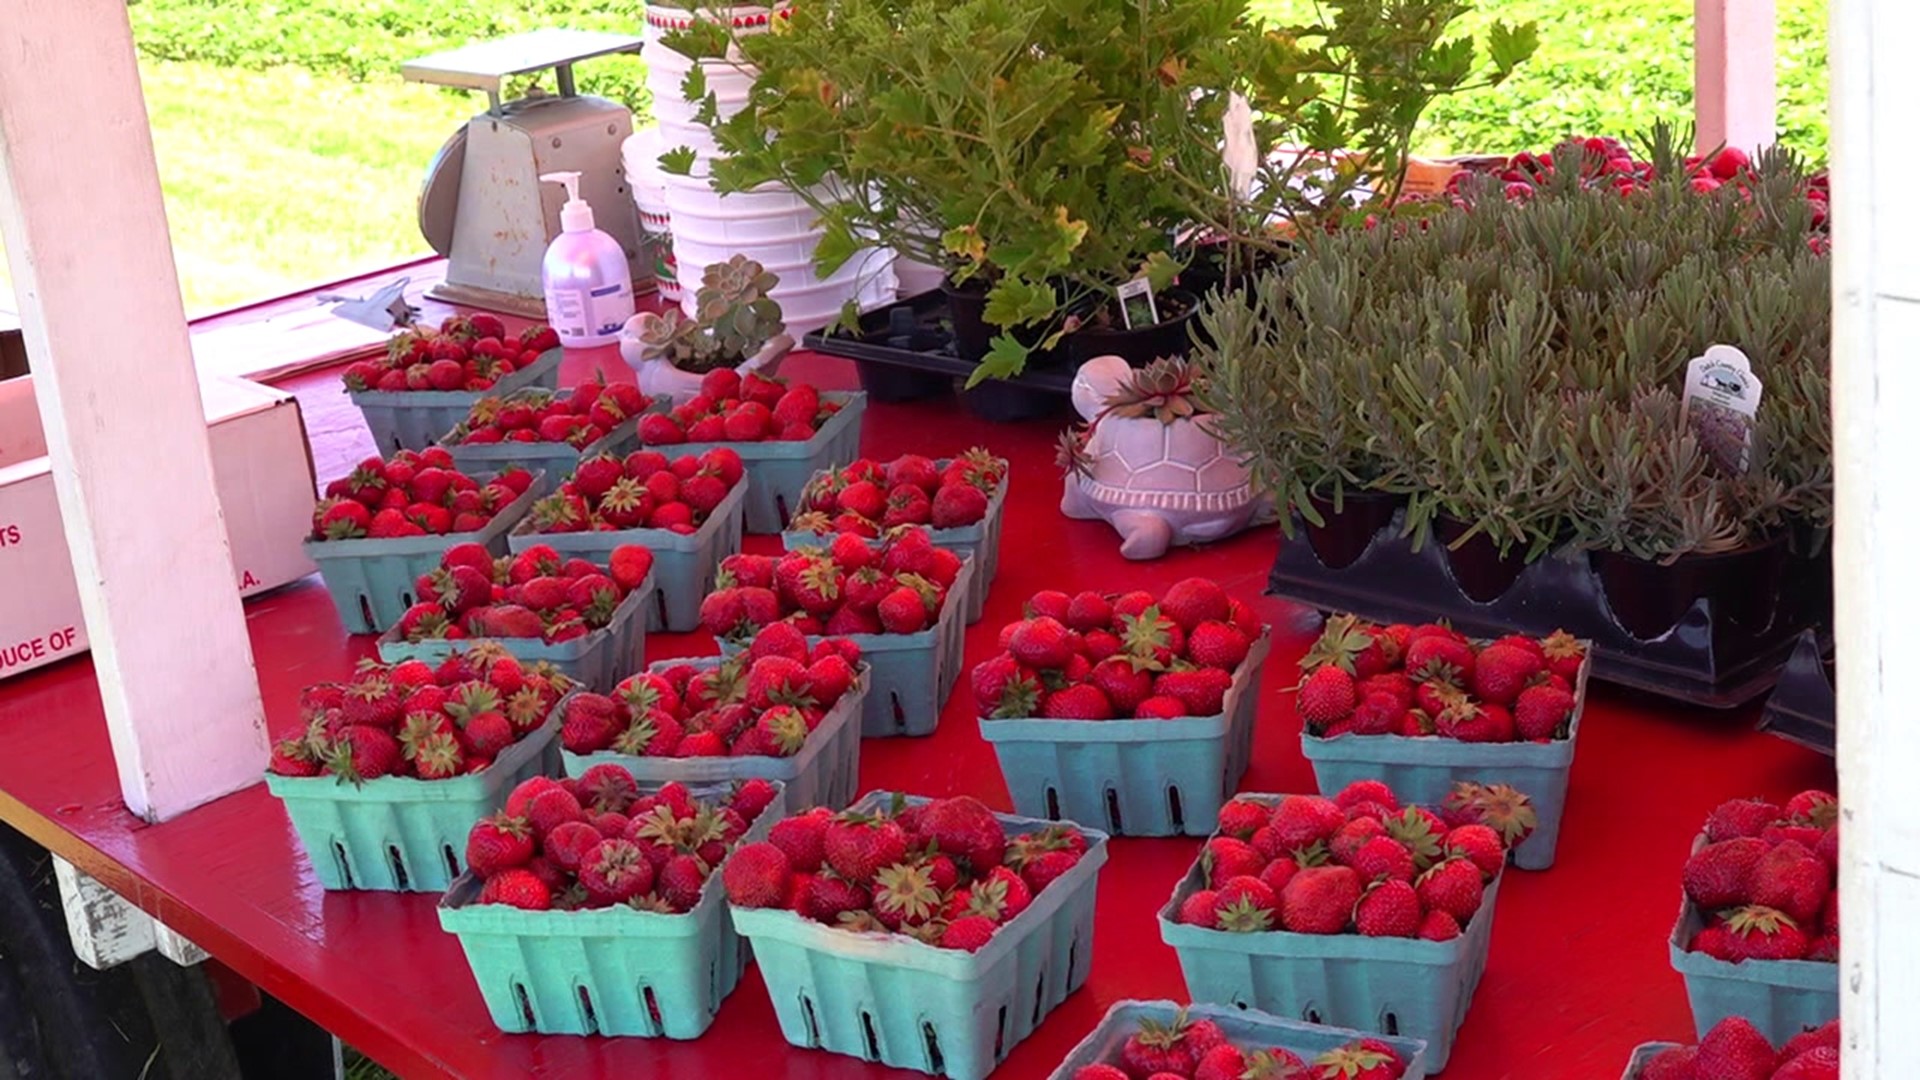 The first day of strawberry season is bringing crowds to farms all over Schuylkill County. Creating an opportunity to teach people about agriculture.